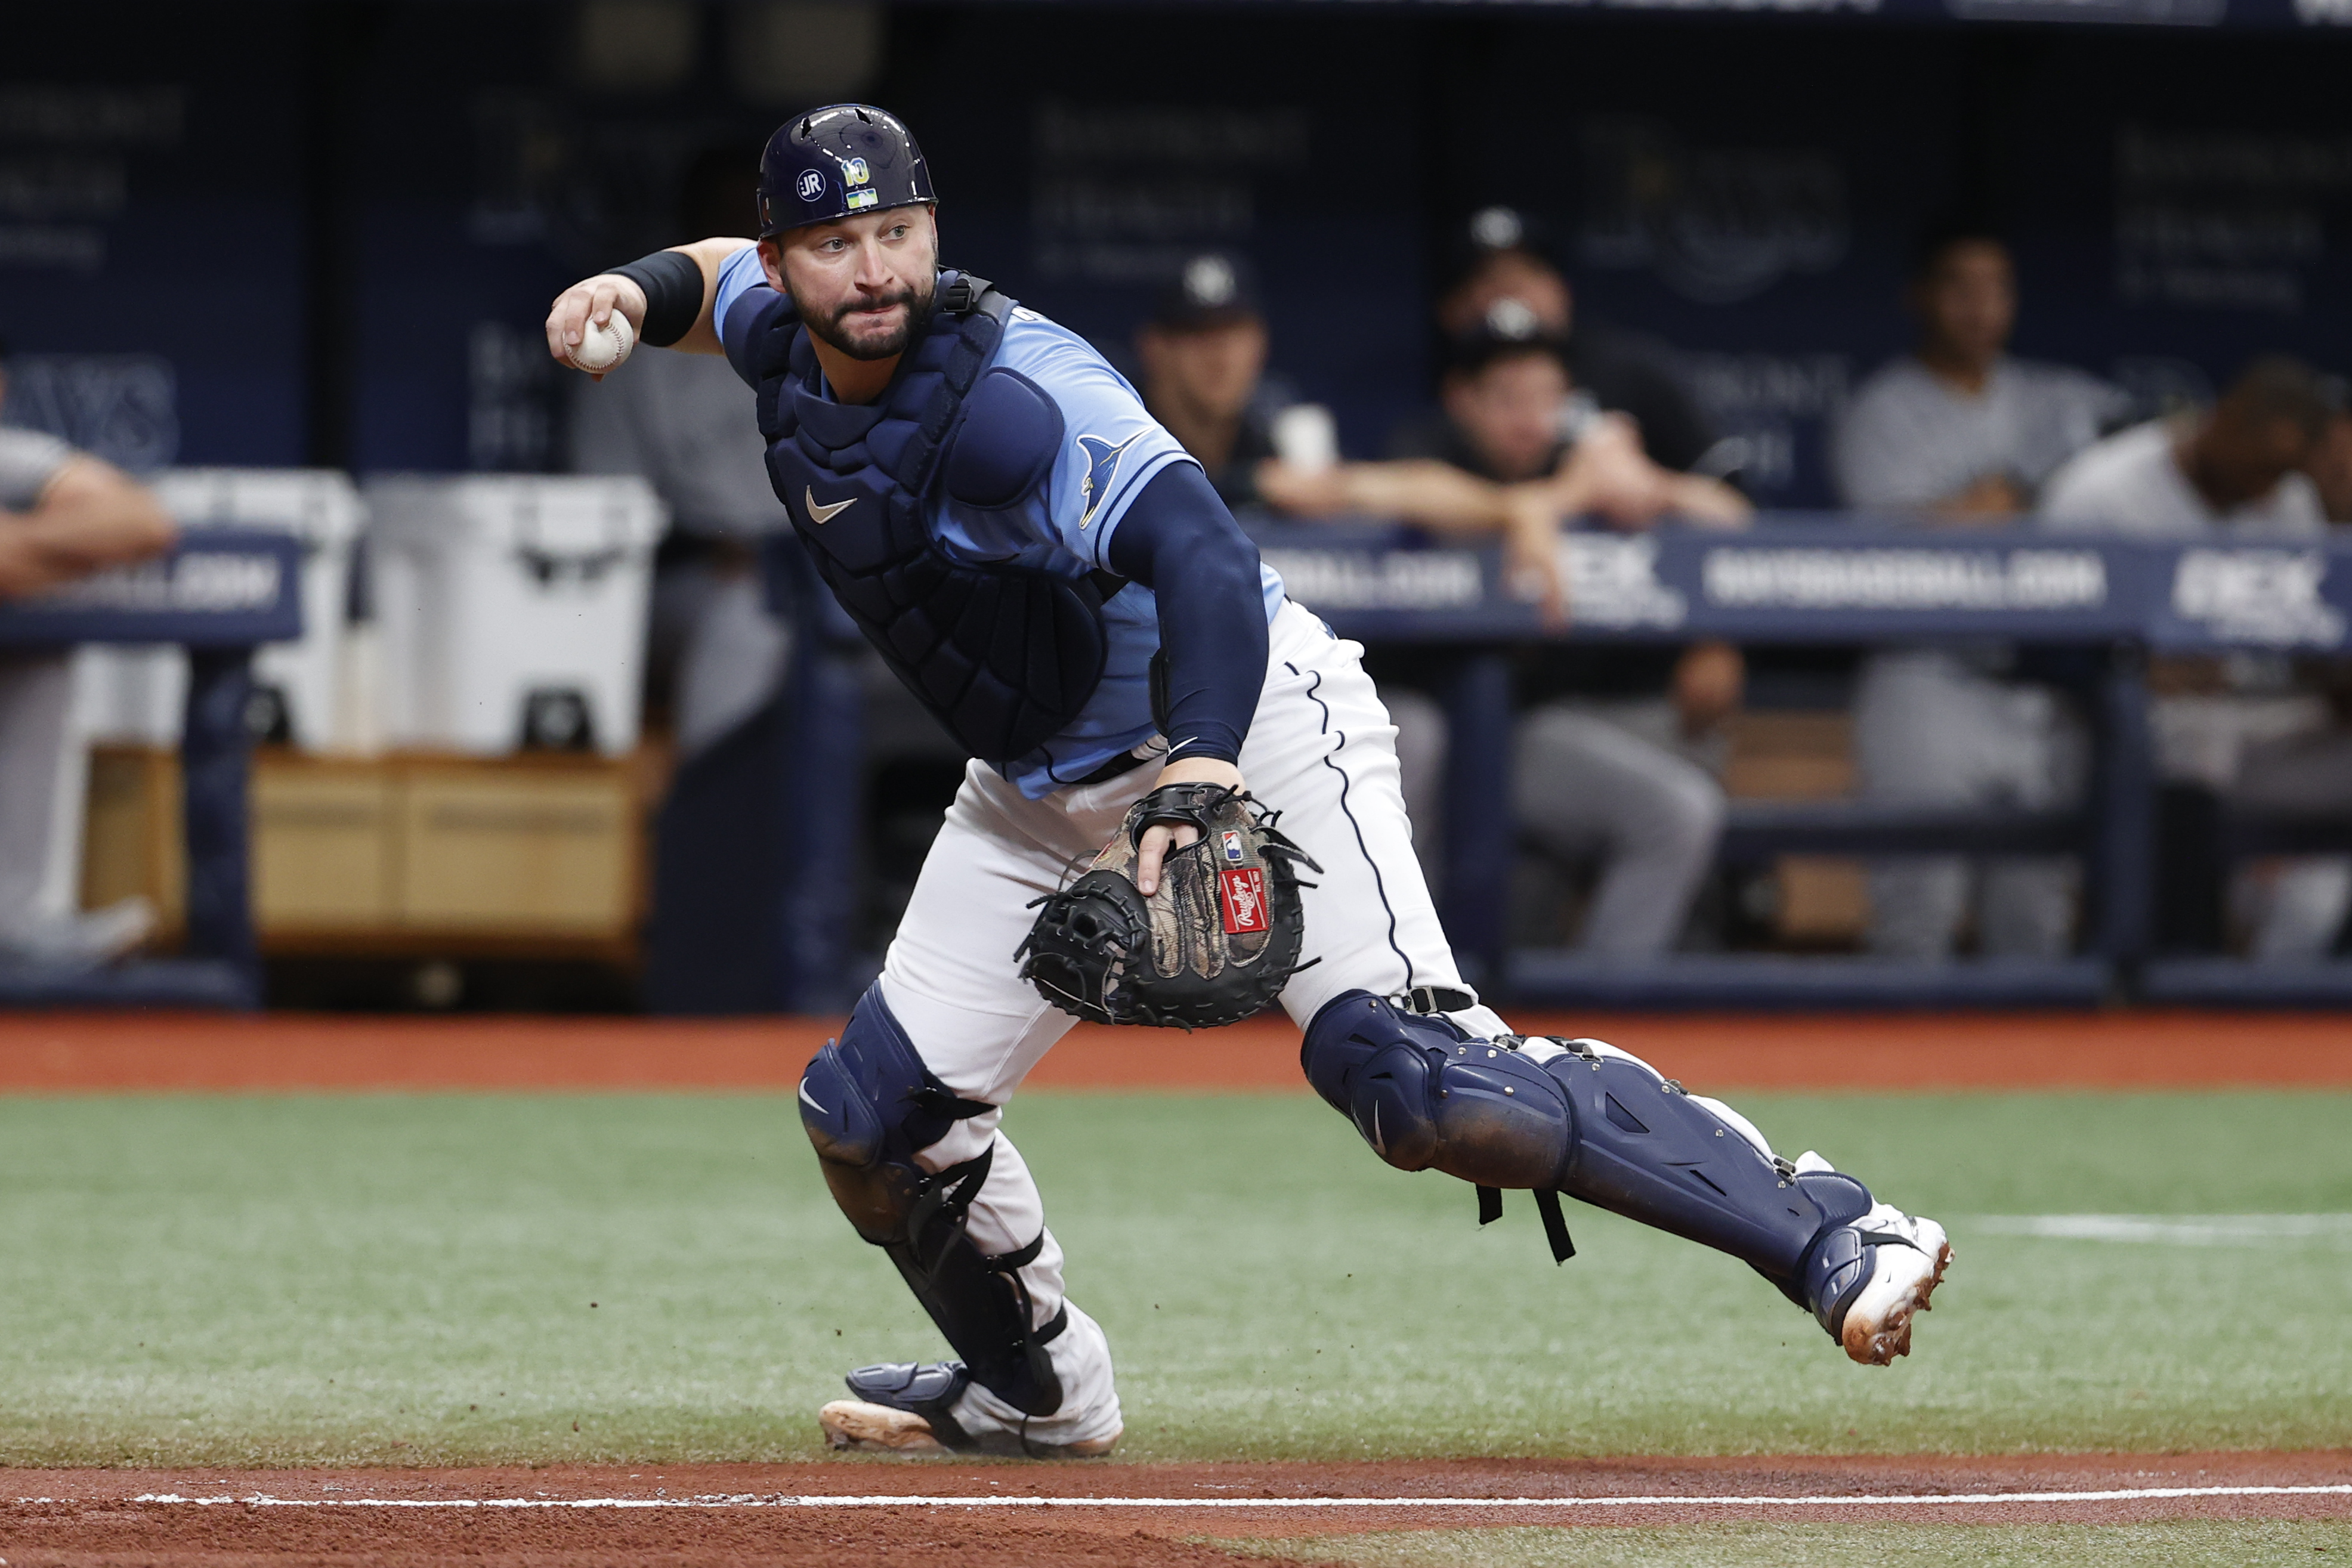 Catcher Mike Zunino Designated For Assignment By Cleveland Guardians